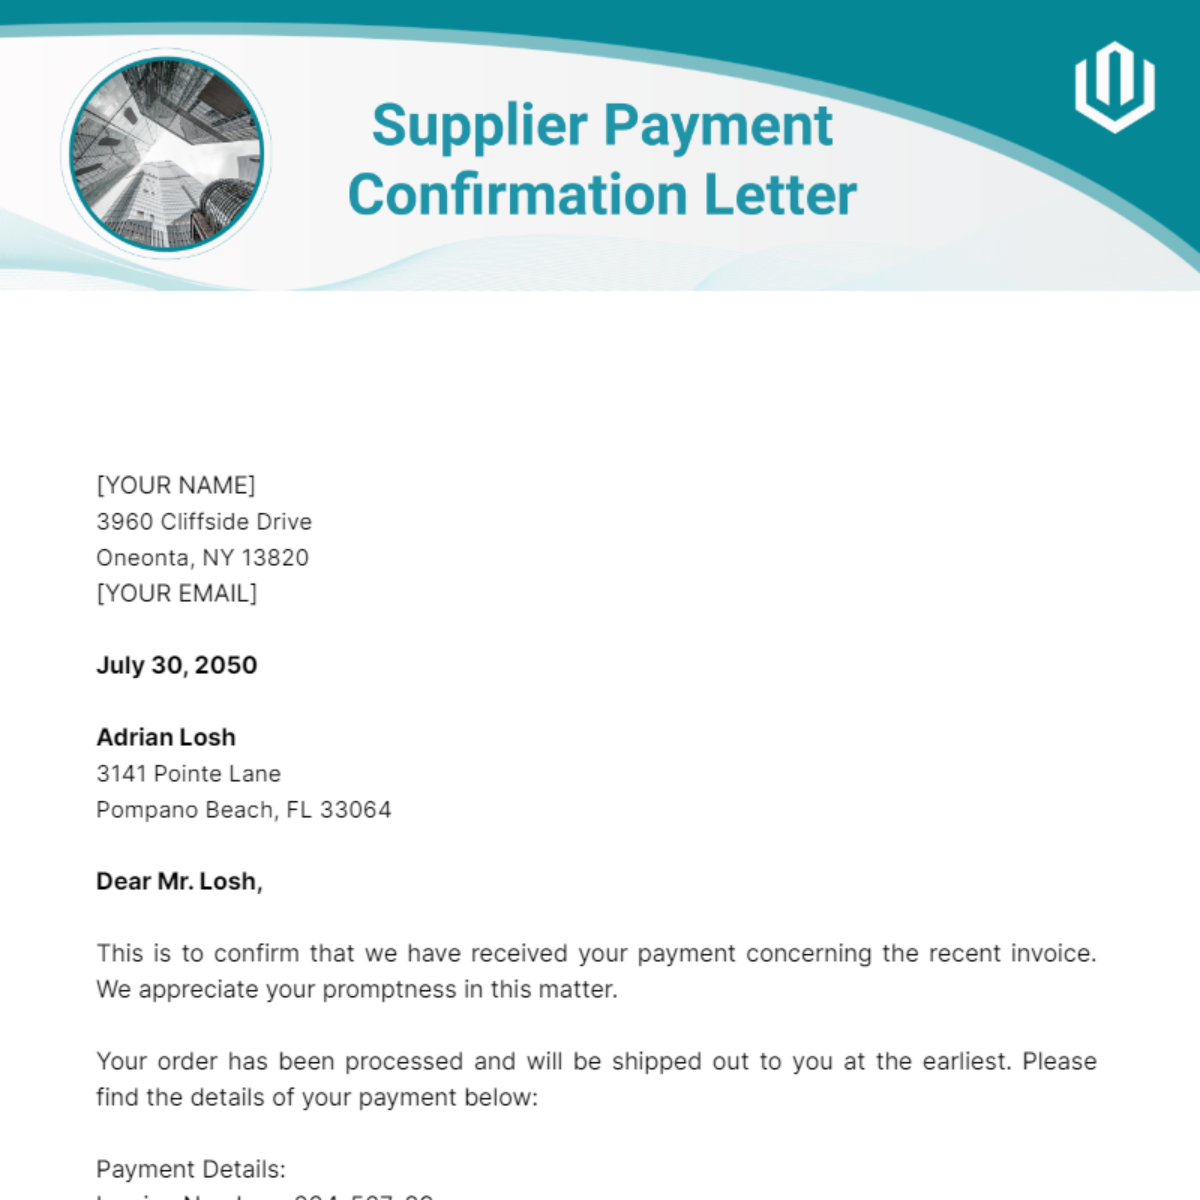 Supplier Payment Confirmation Letter Template